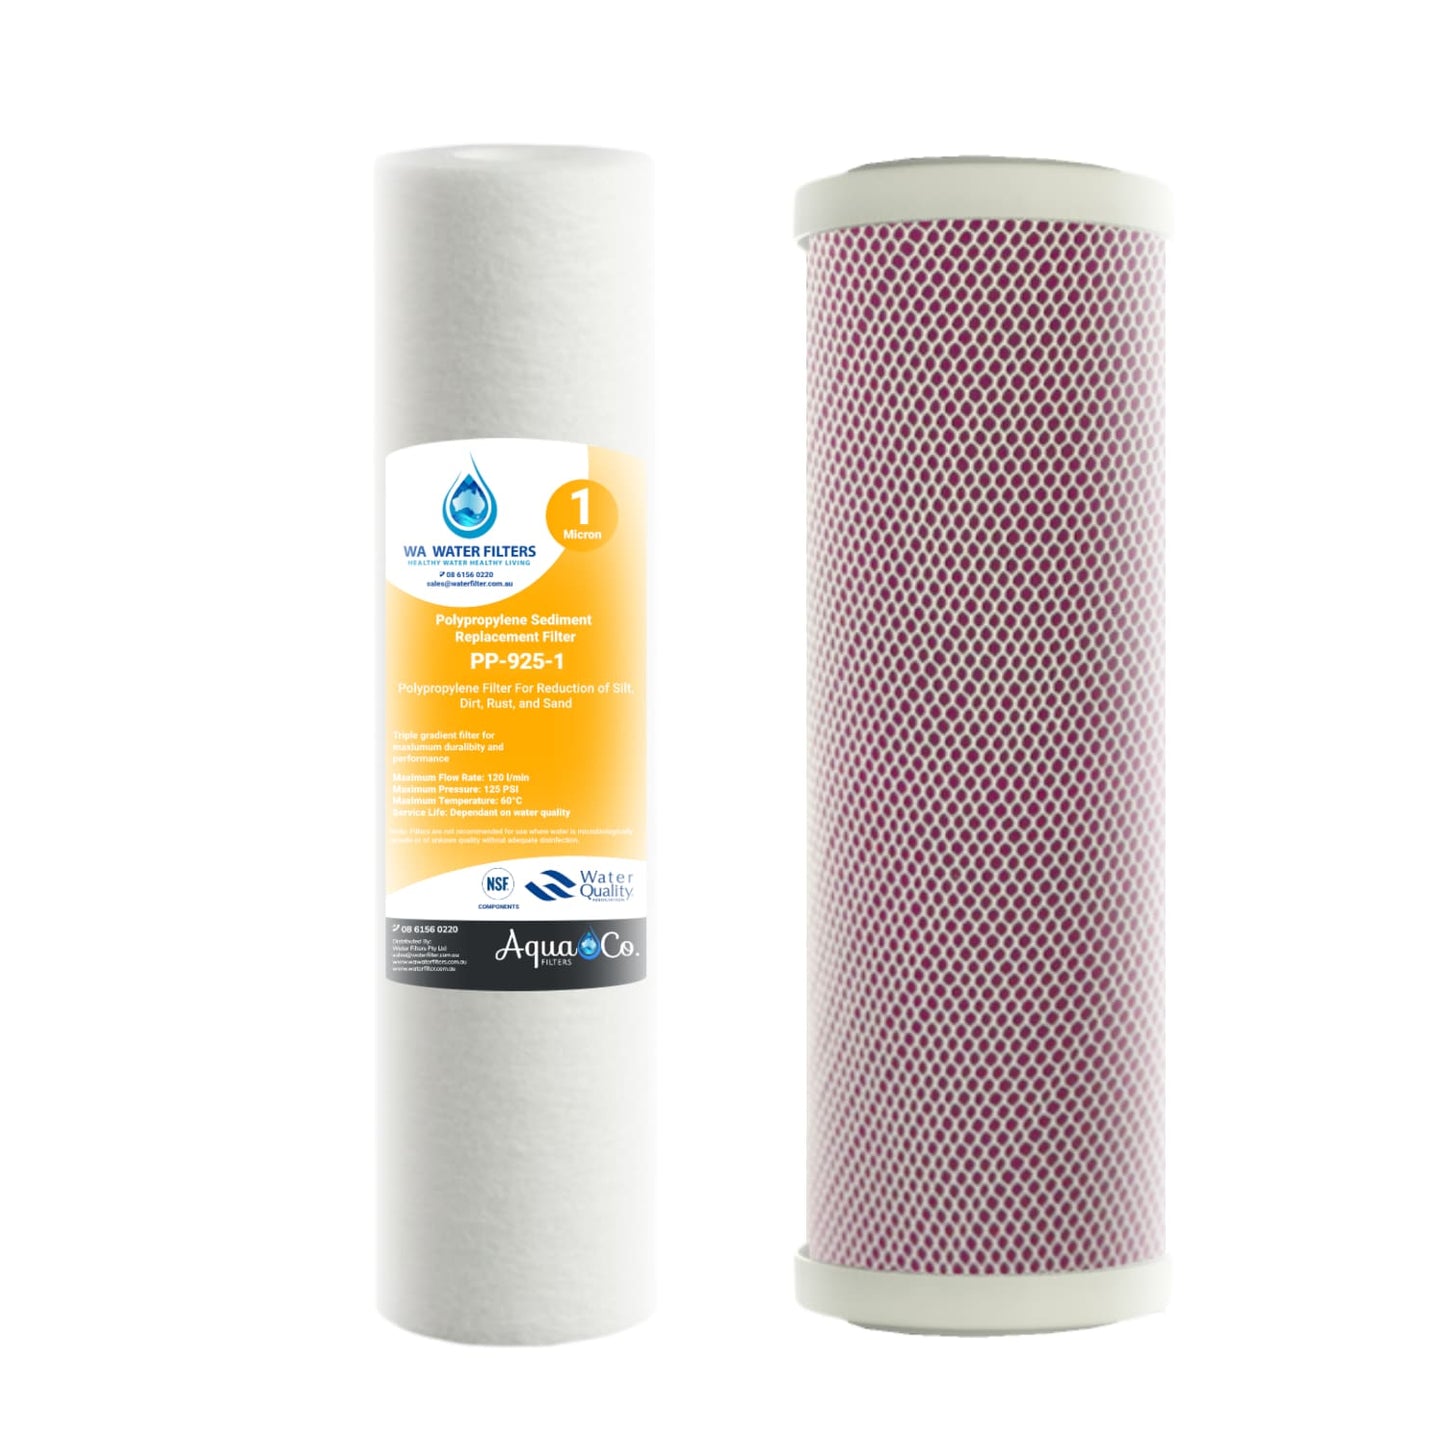 AquaCo 9" x 2.5" Sediment and Aragon Replacement Filters - Reduce Chlorine, Taste, Odours, Parasites, Bacteria and Lead.